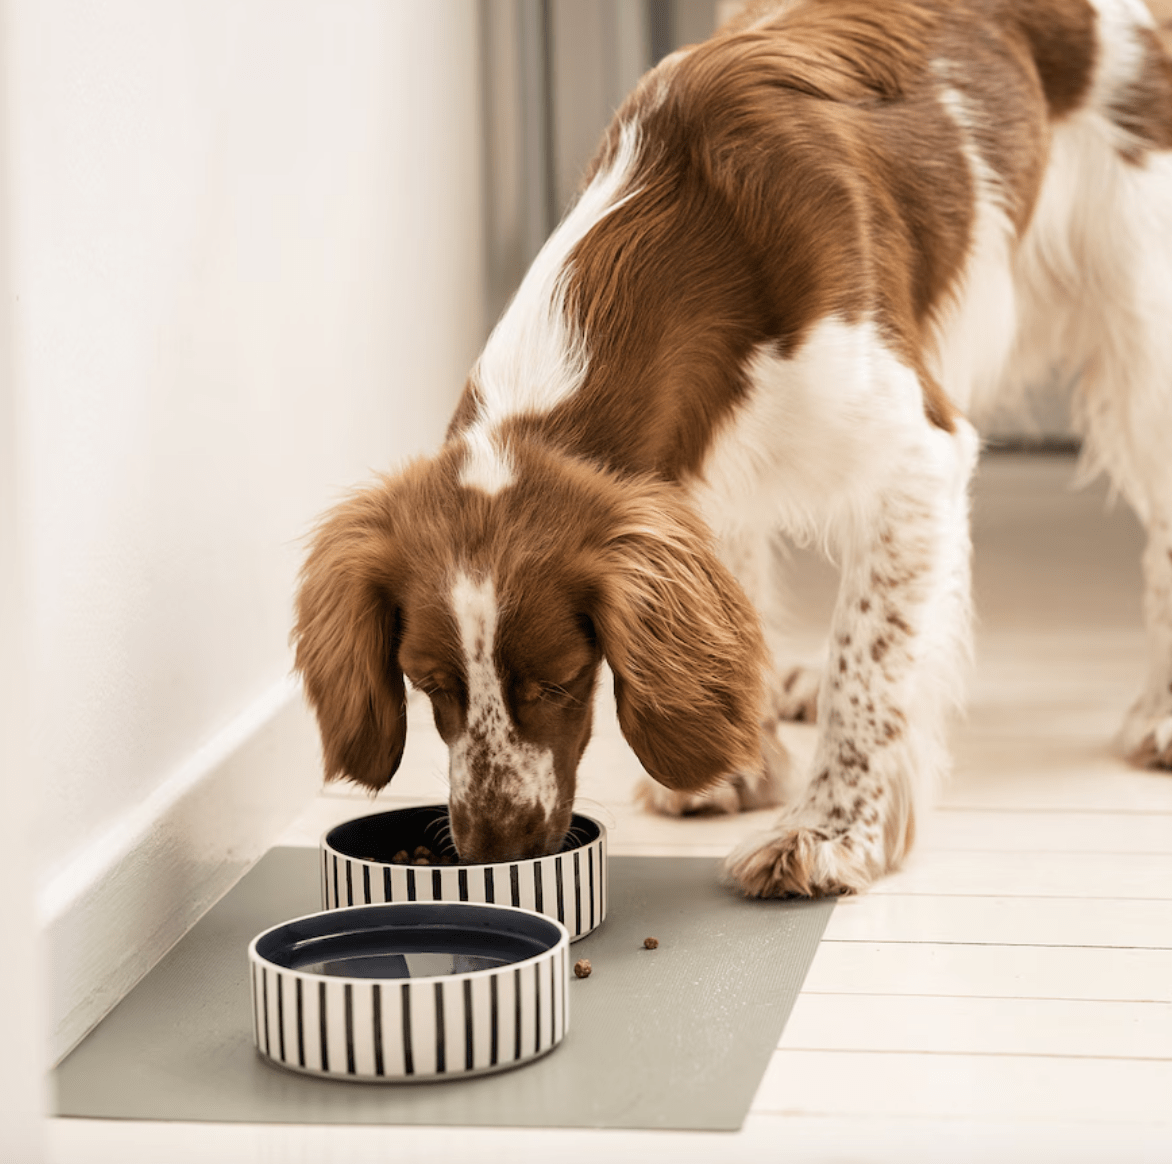 dog pet dish eating out of food bowl